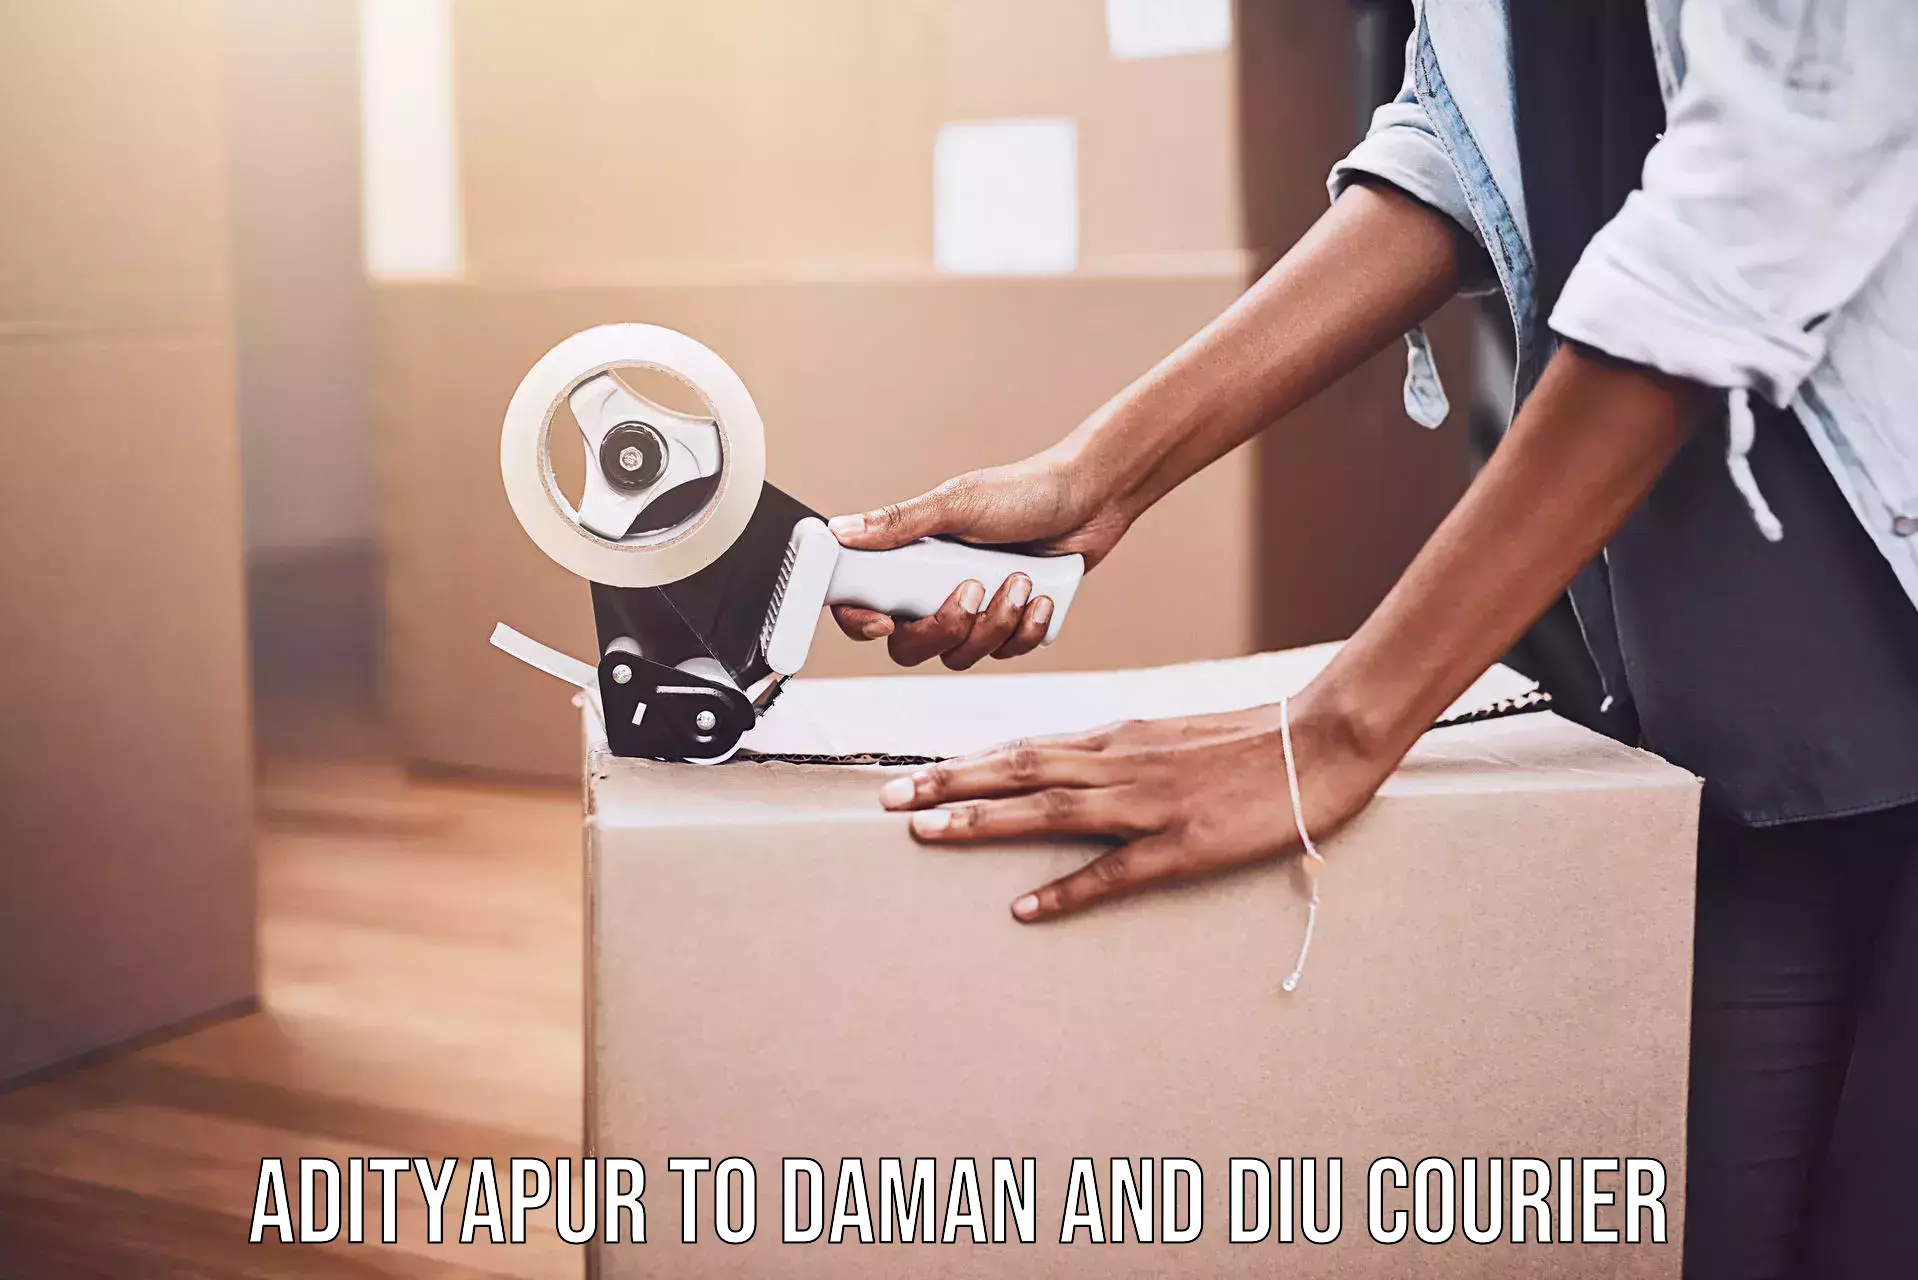 Large-scale shipping solutions Adityapur to Diu